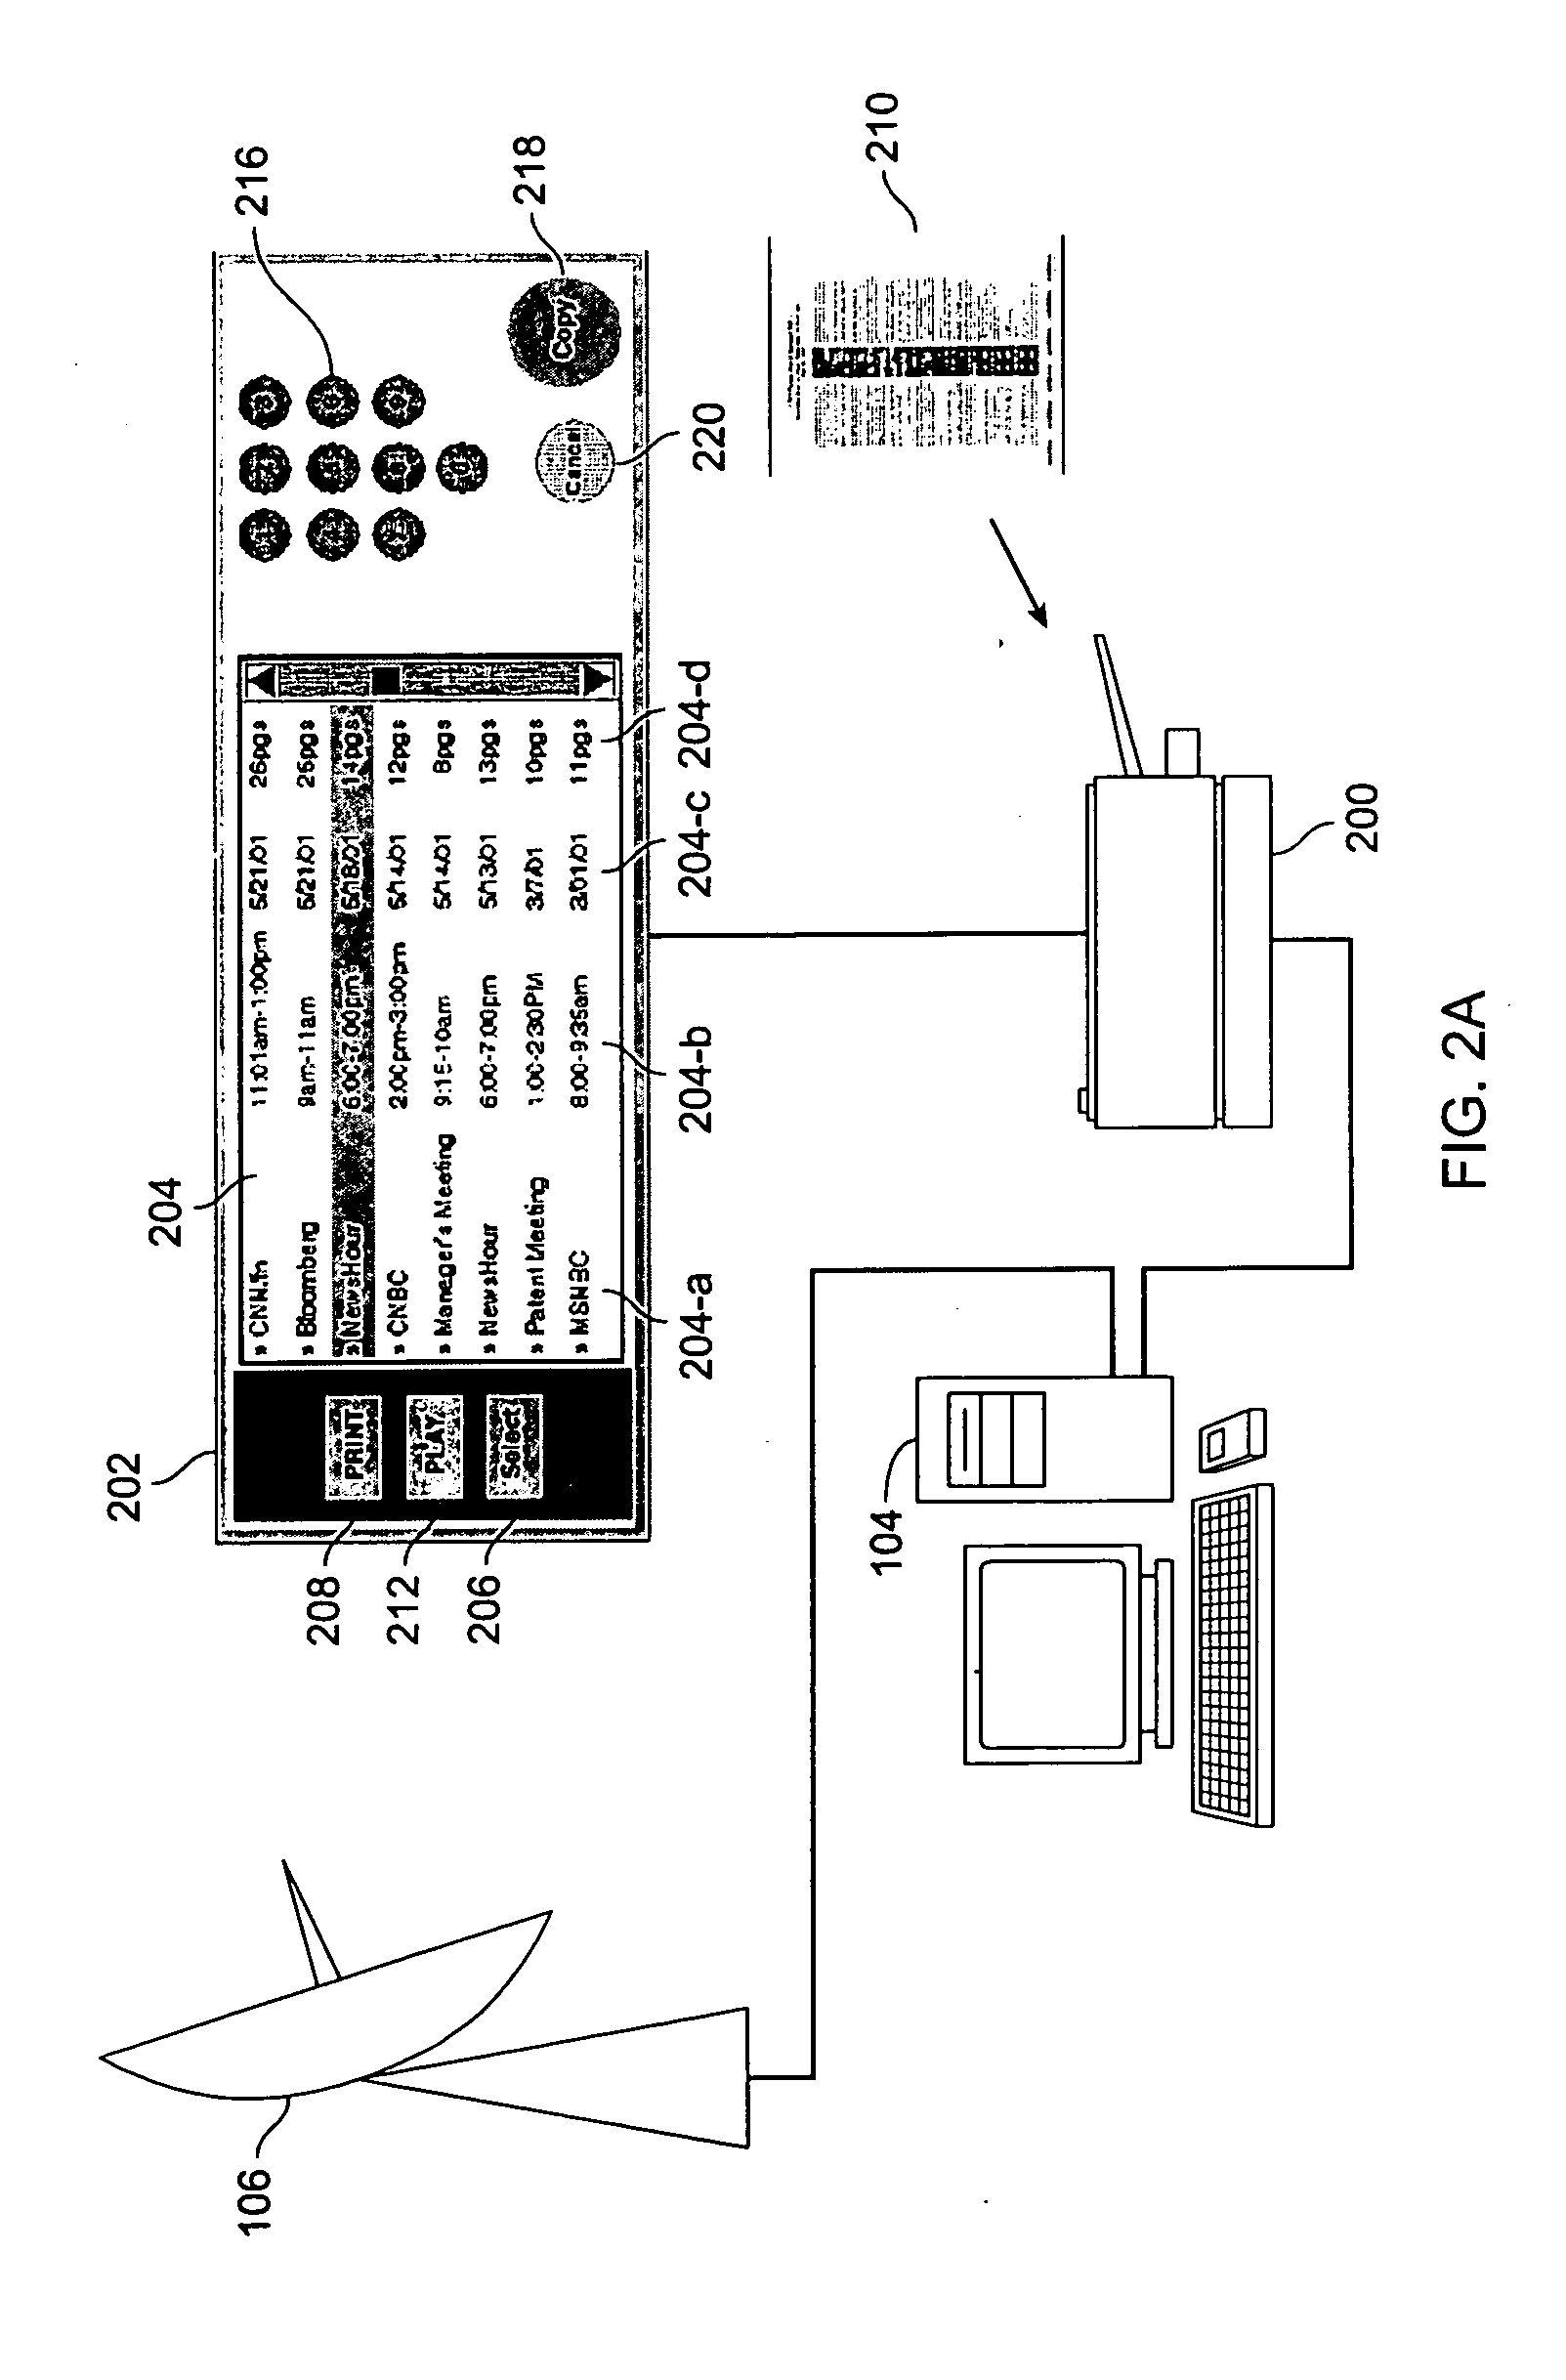 Paper-based interface for multimedia information